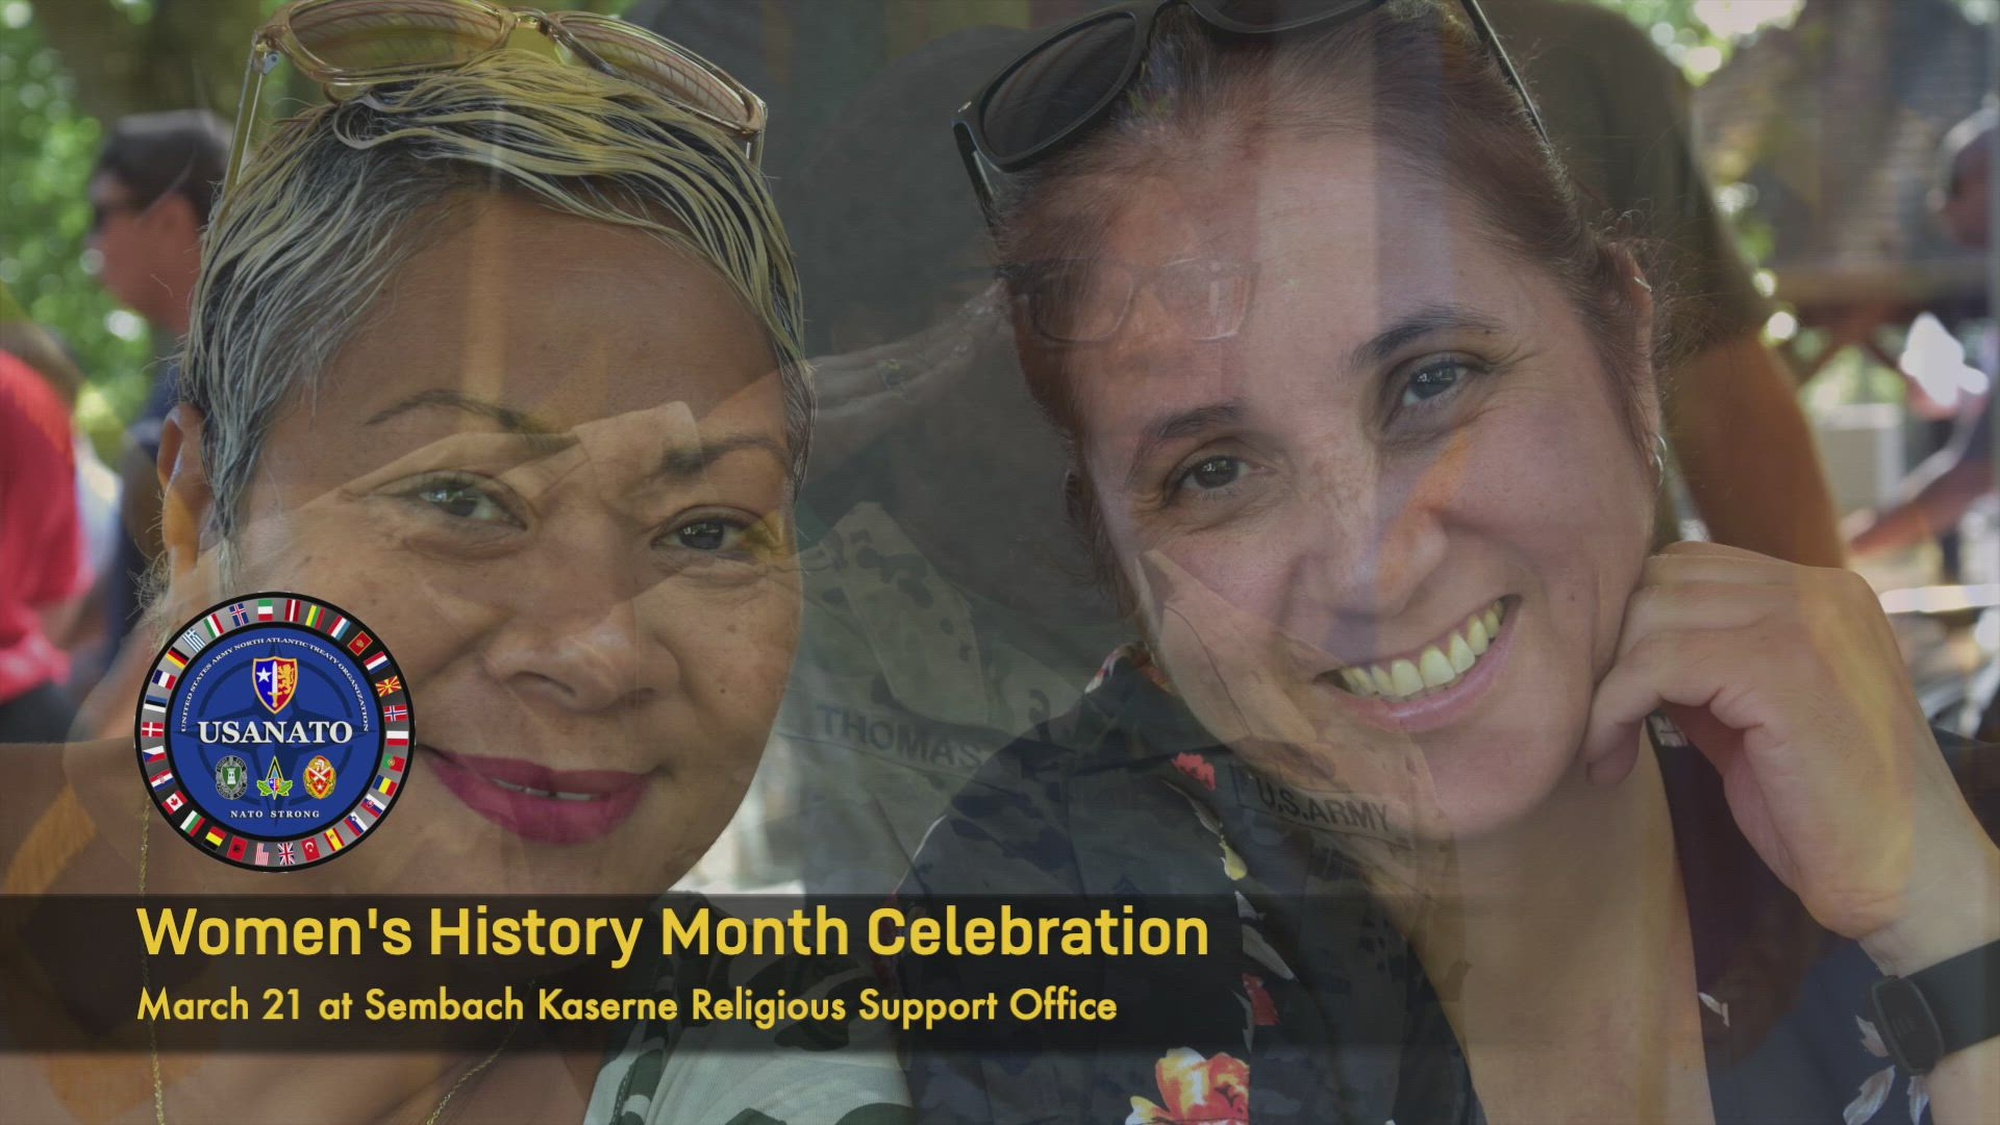 Every year in March, the U.S. Army celebrates Women's History Month. This year's theme is Celebrating Women Who Tell our Stories. Please join us March 21 from 1:30 to 3:30 p.m. at the Sembach Kaserne Religious Support Office.